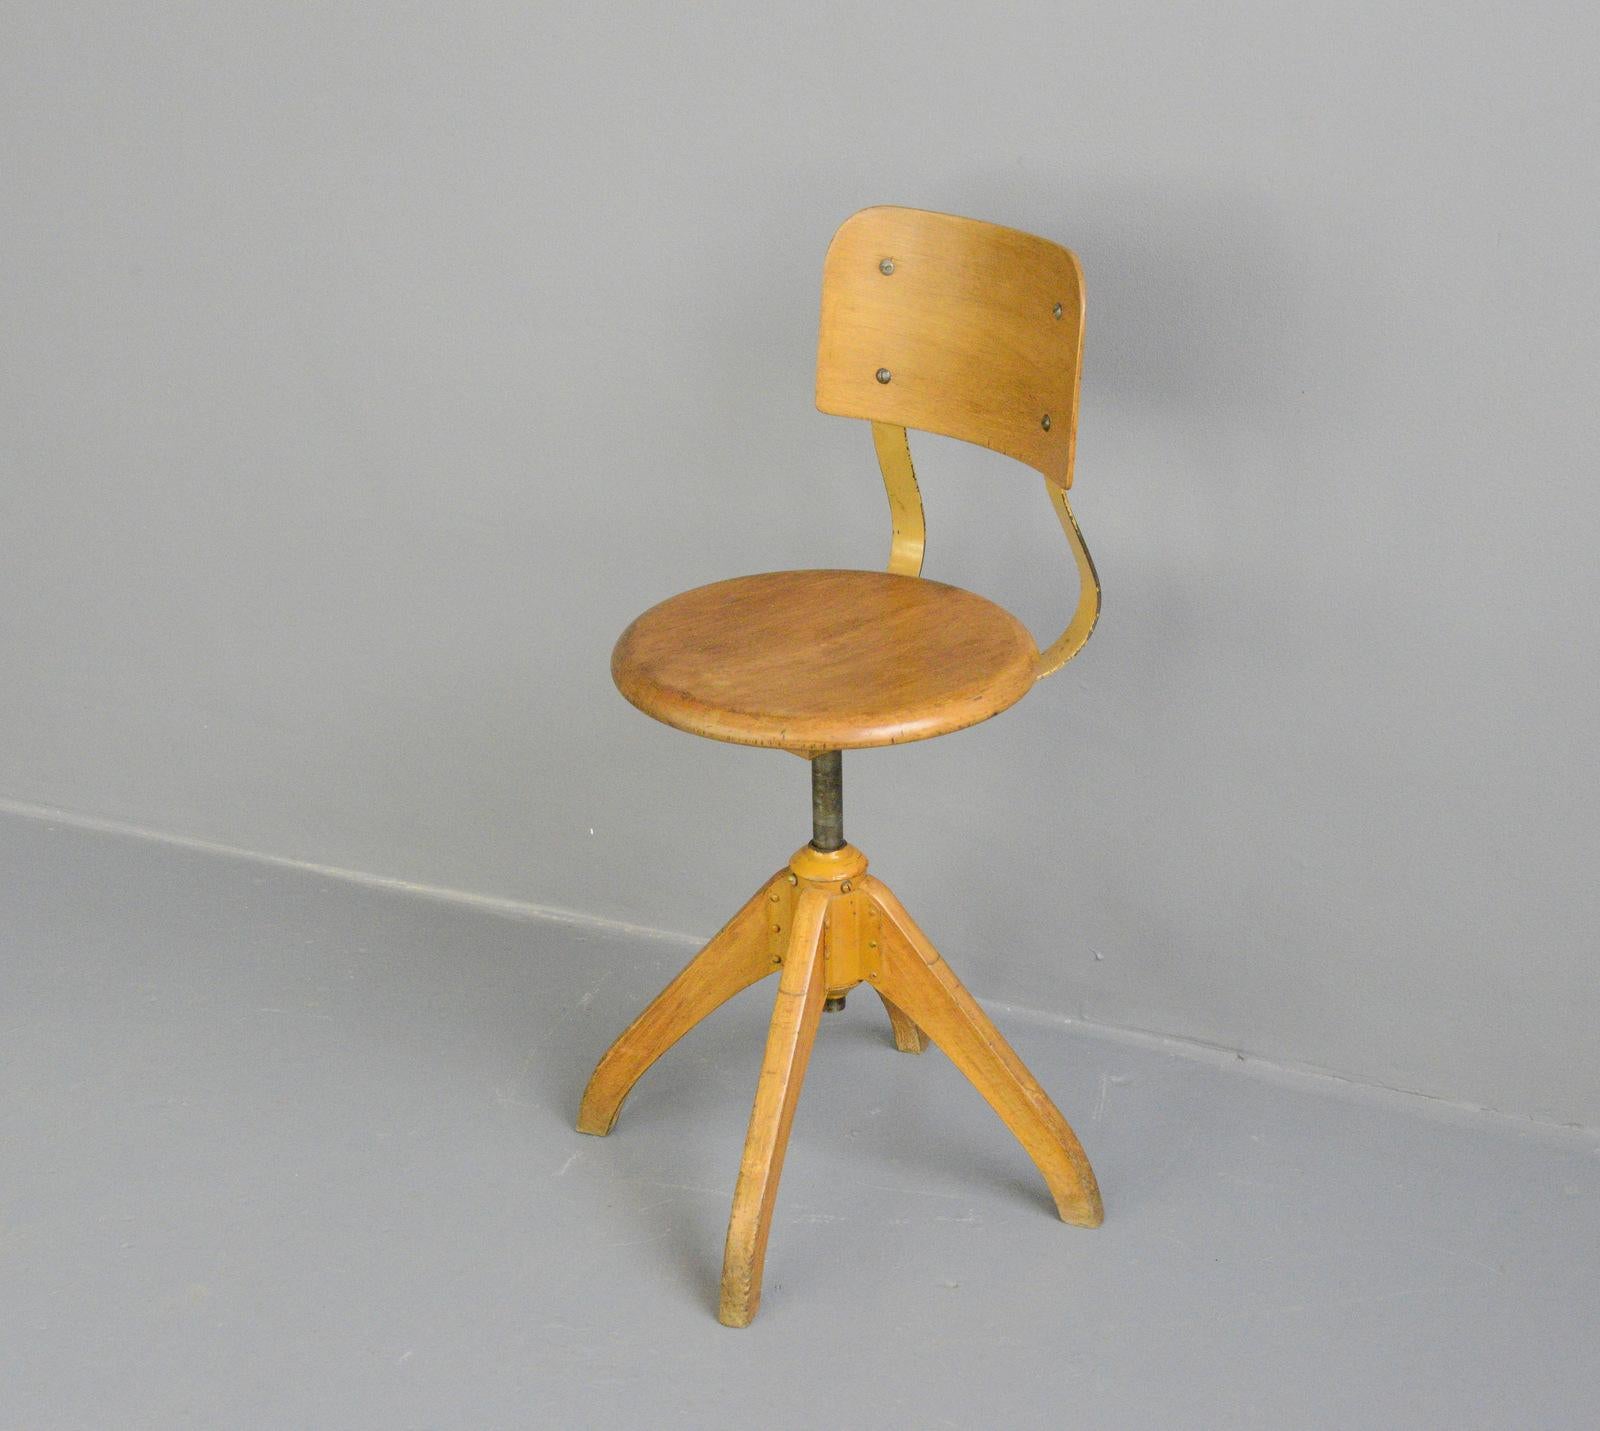 Ama Elastik factory chair, circa 1930s

- Sprung seat
- Height adjustable
- Solid beech seat
- Curved ply backrest
- Original maker decal on the backrest
- Made by Ama Elastik
- German, 1930s
- Measures: 40cm wide x 41cm deep x 90cm tall
-